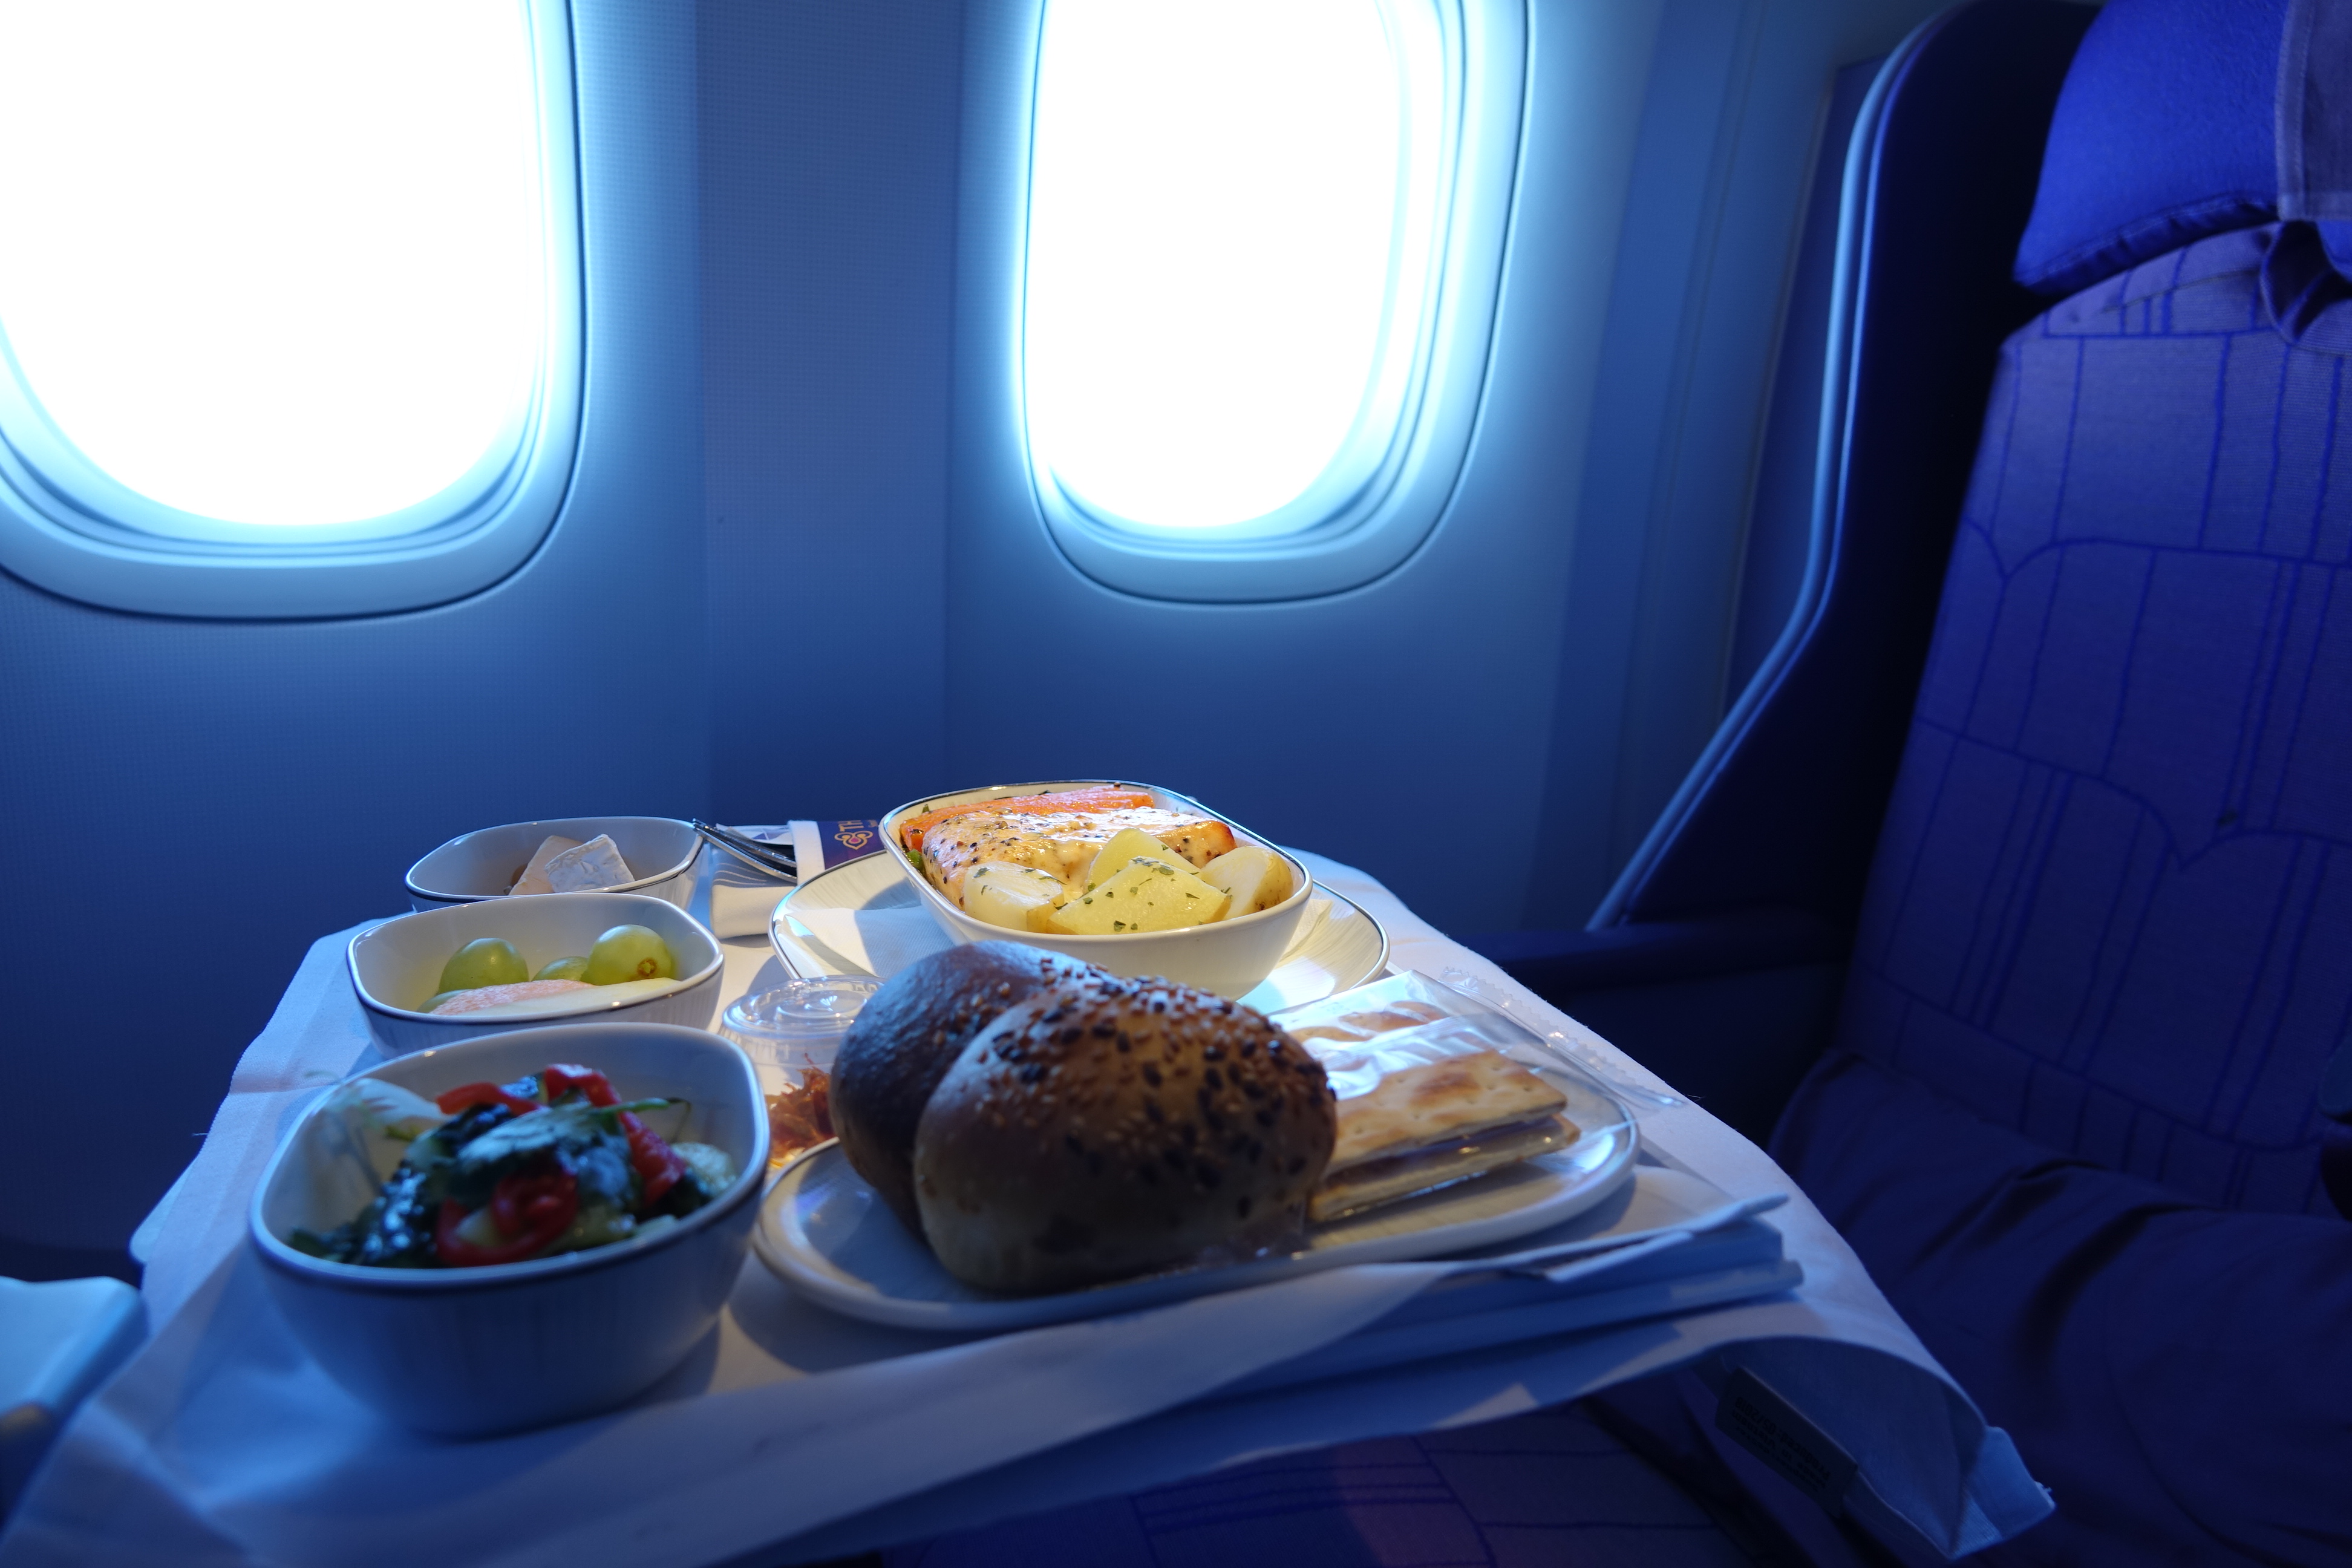 food on a table in an airplane